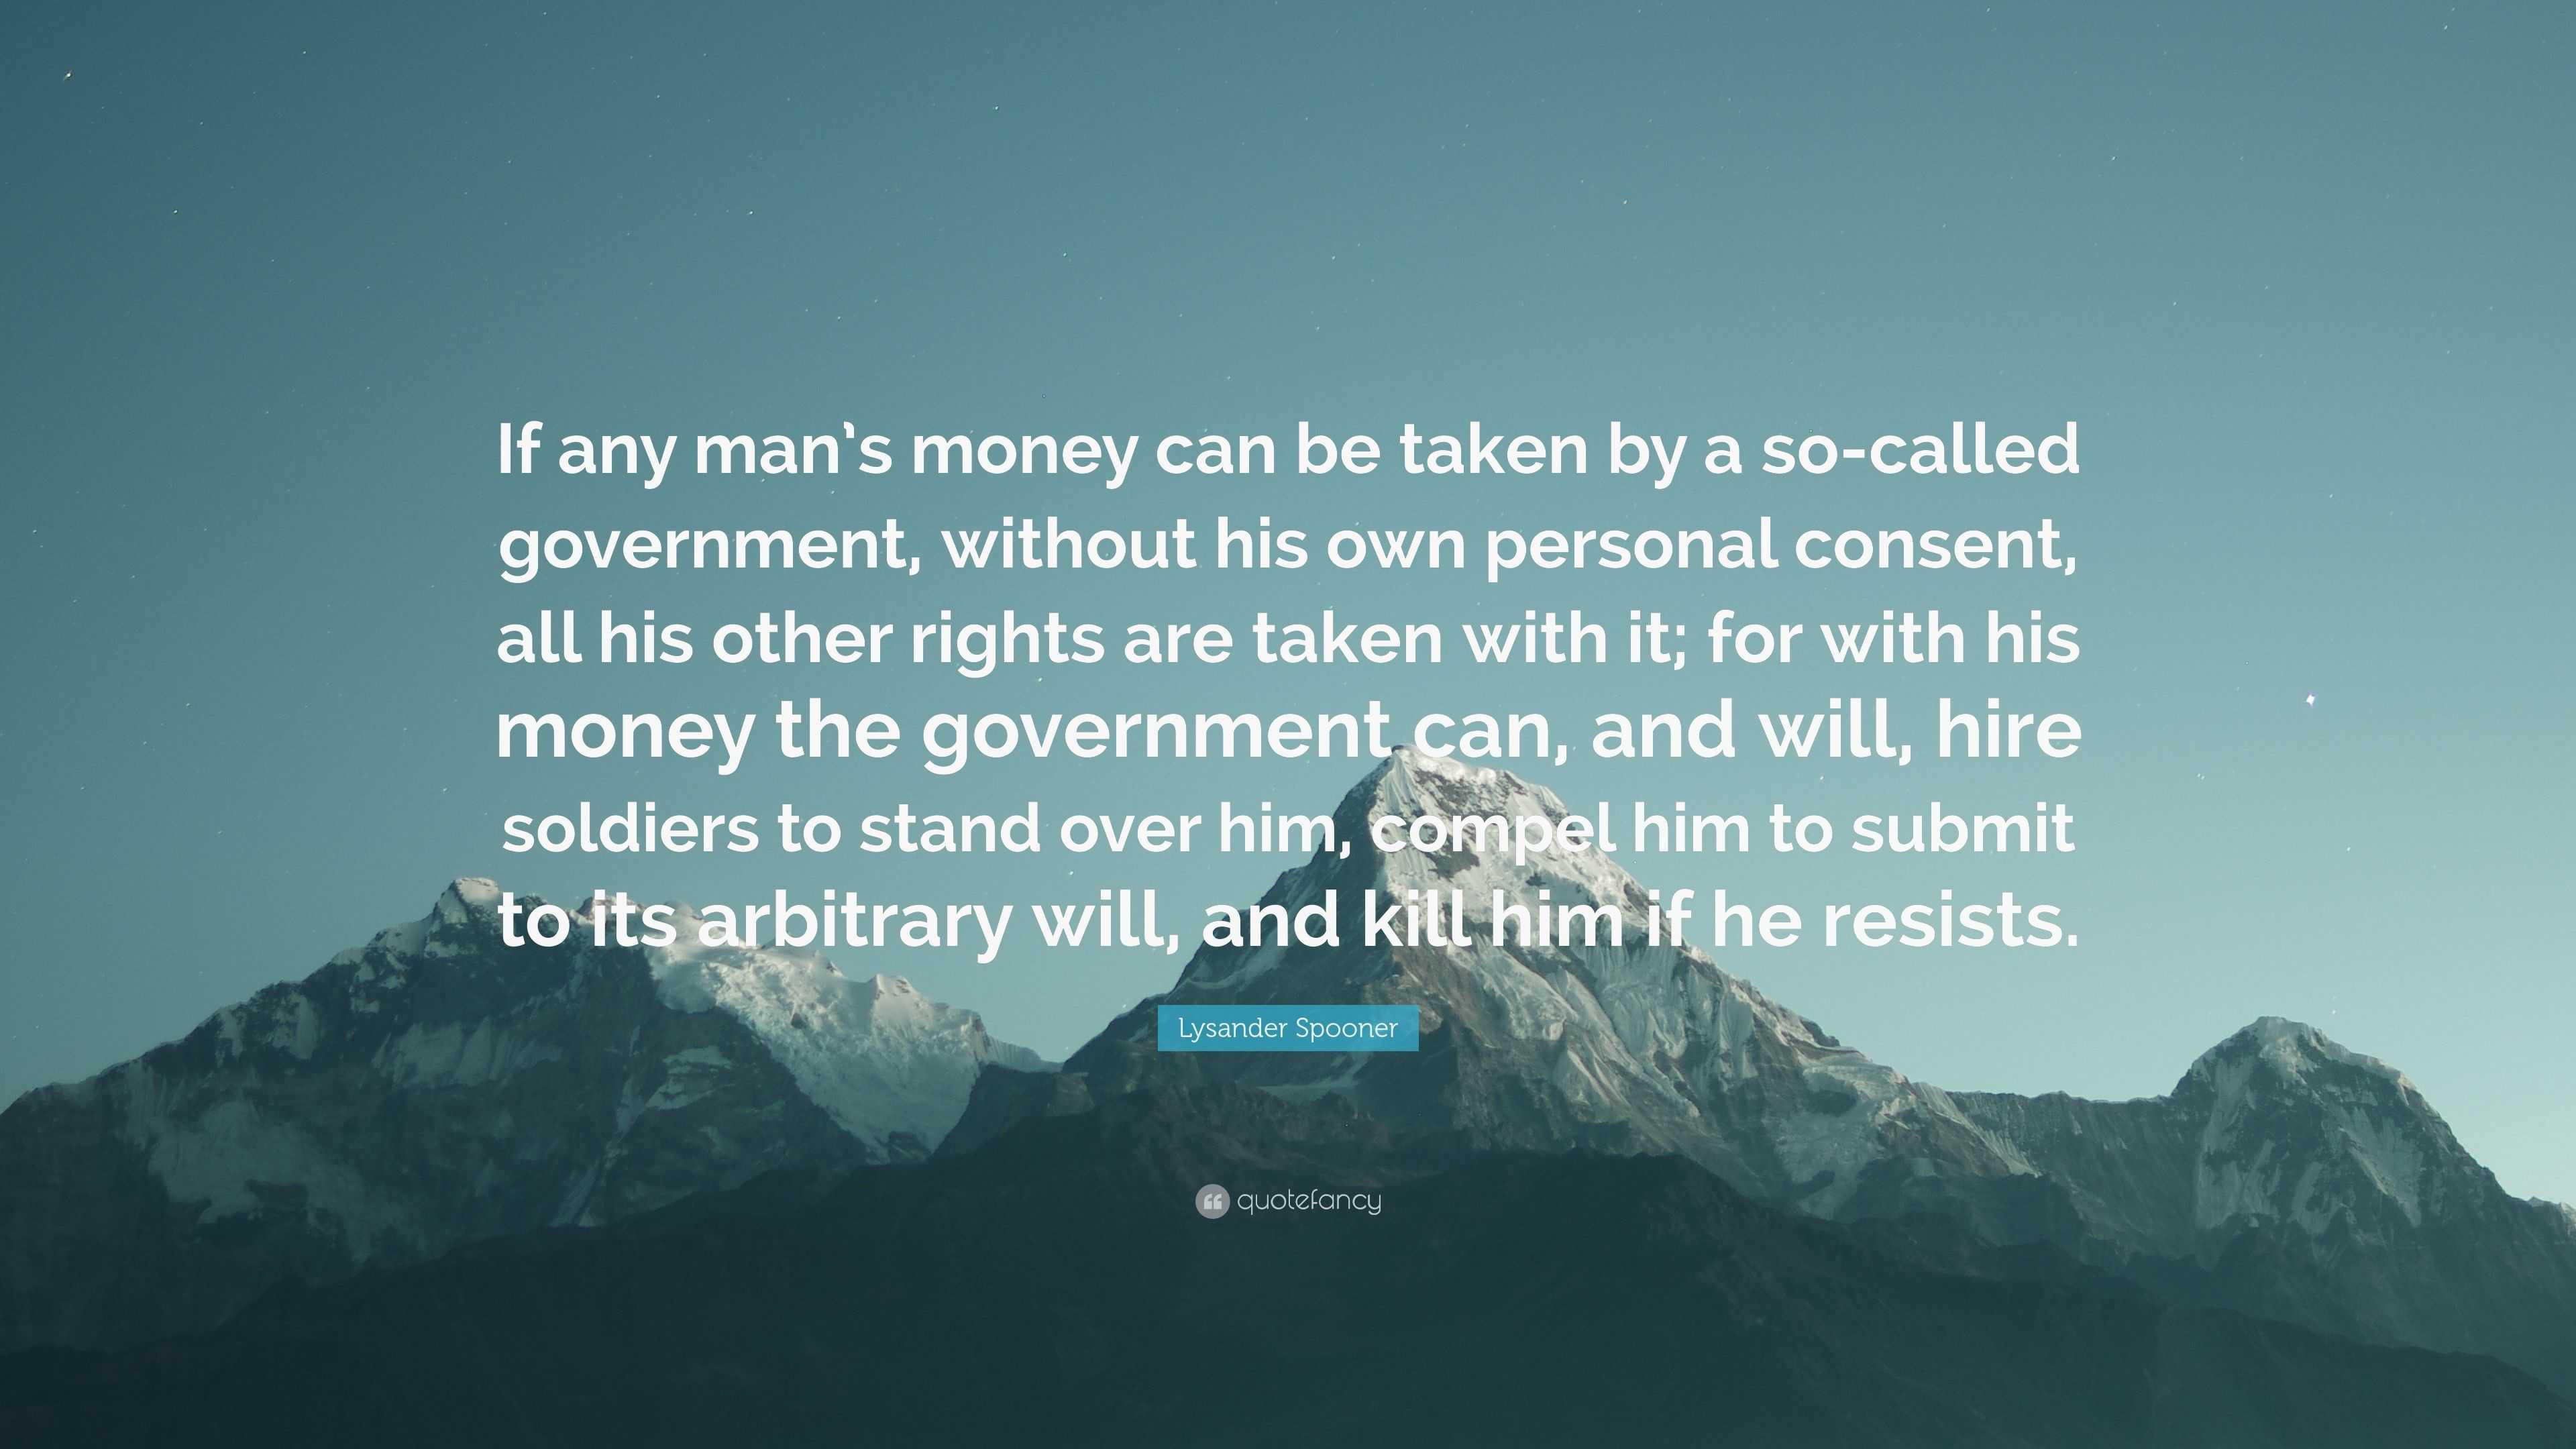 Lysander Spooner Quote: “If any man's money can be taken by a so-called  government, without his own personal consent, all his other rights are  ta”